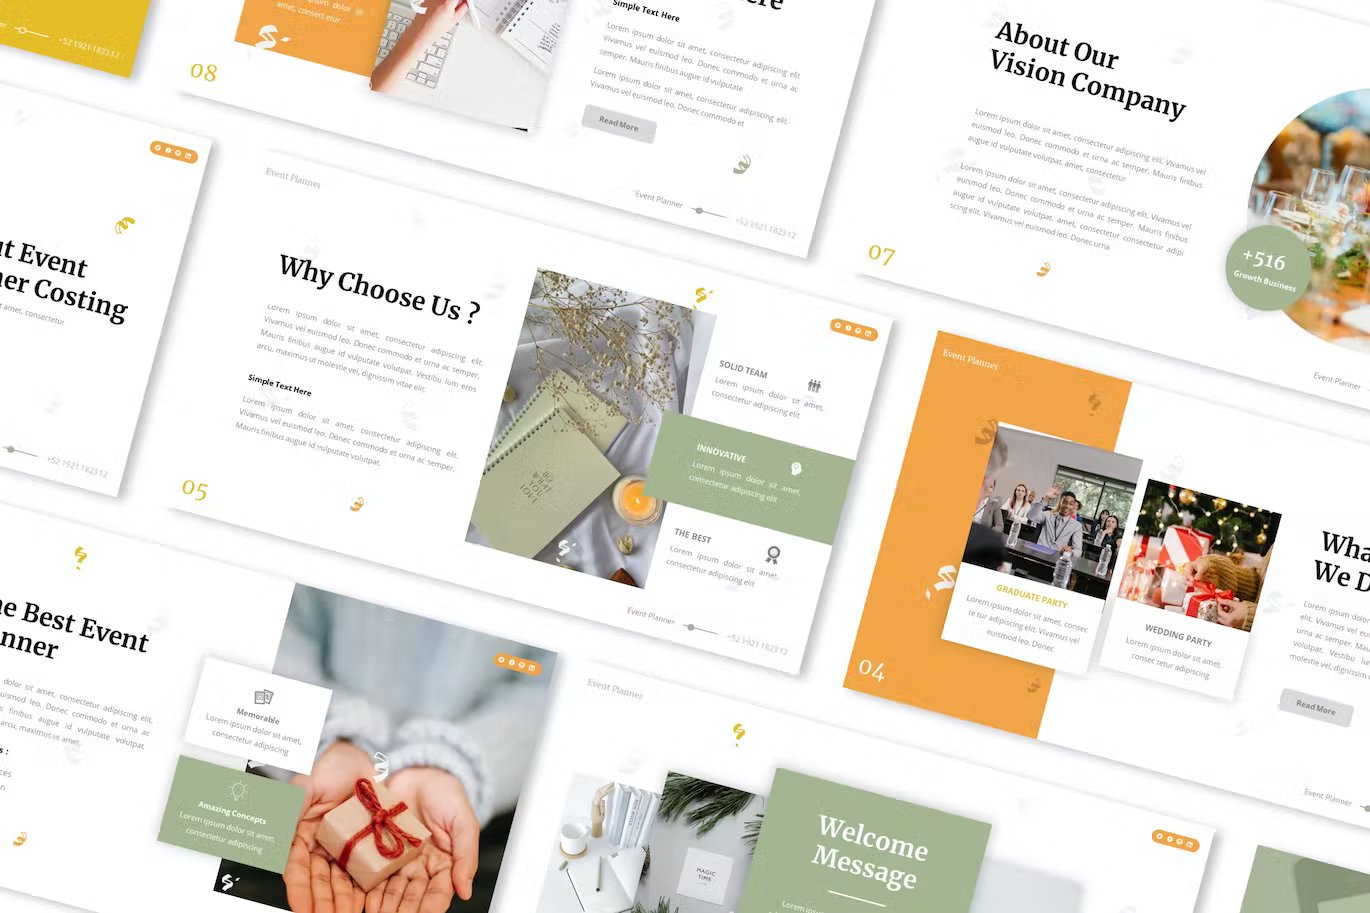 A set of different event planner powerpoint presentation templates.